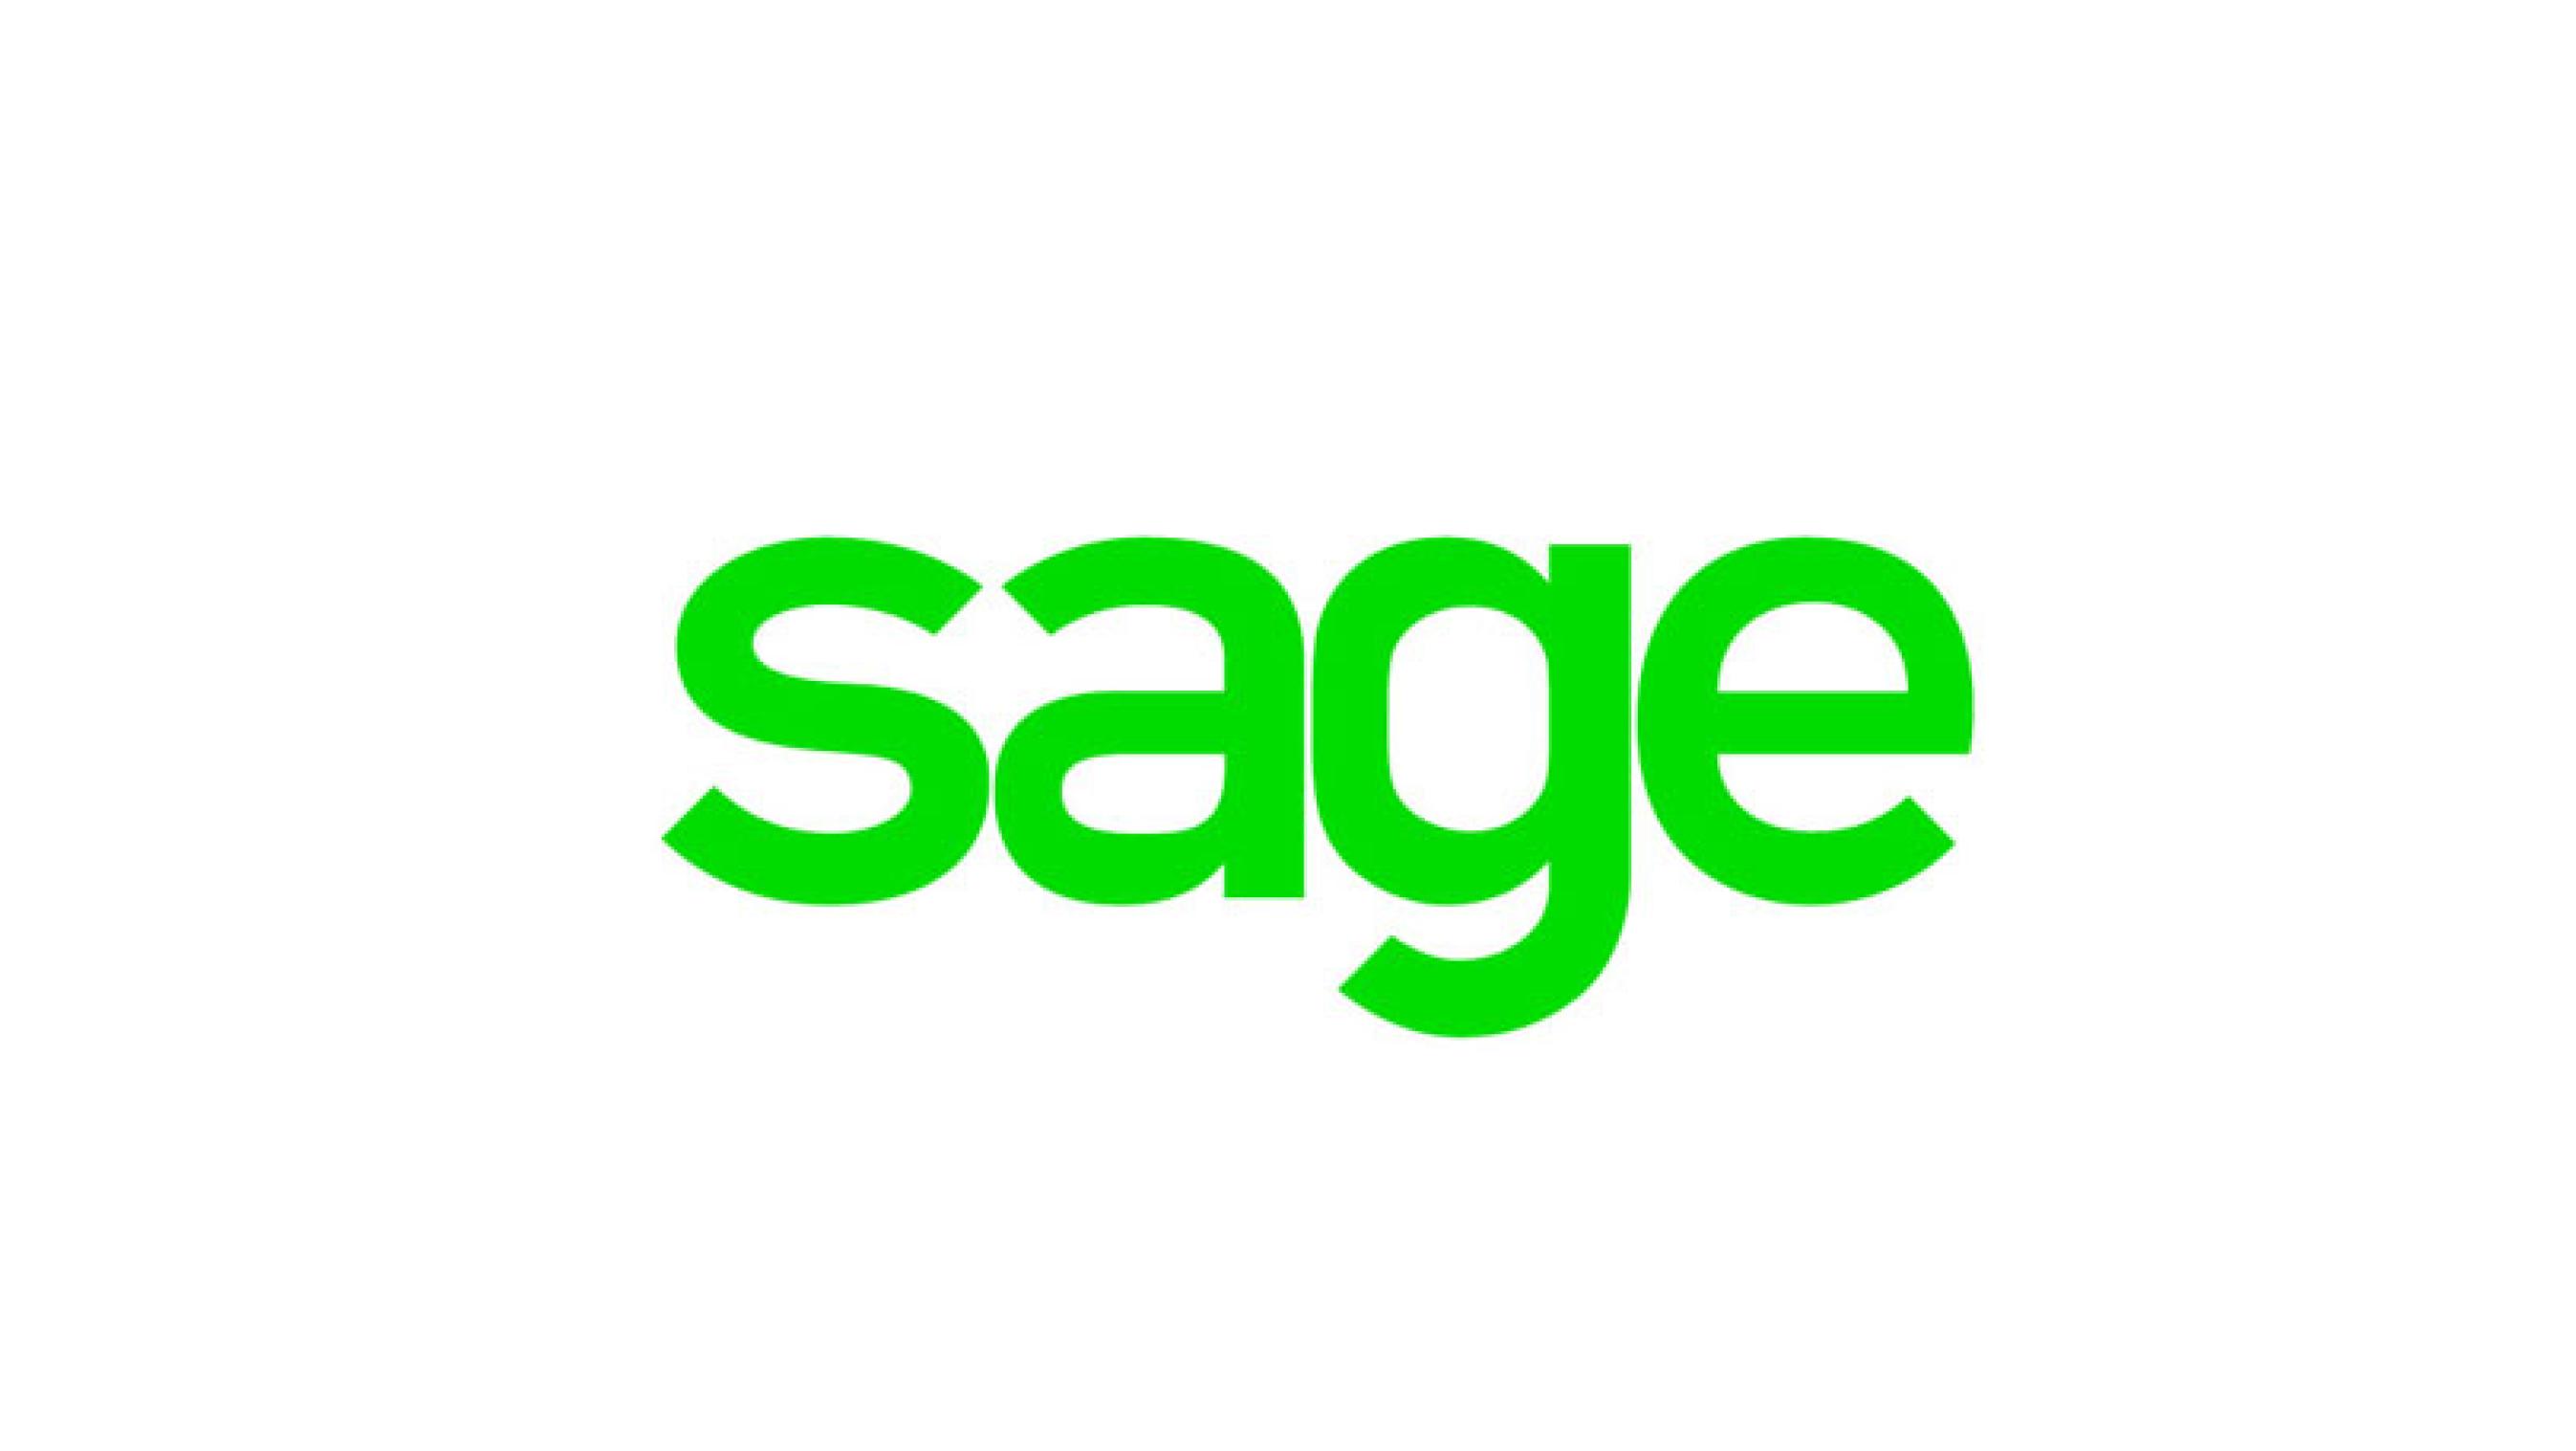 Small Businesses to Benefit as Sage Further Expands Its Marketplace With Latest Round of New Apps